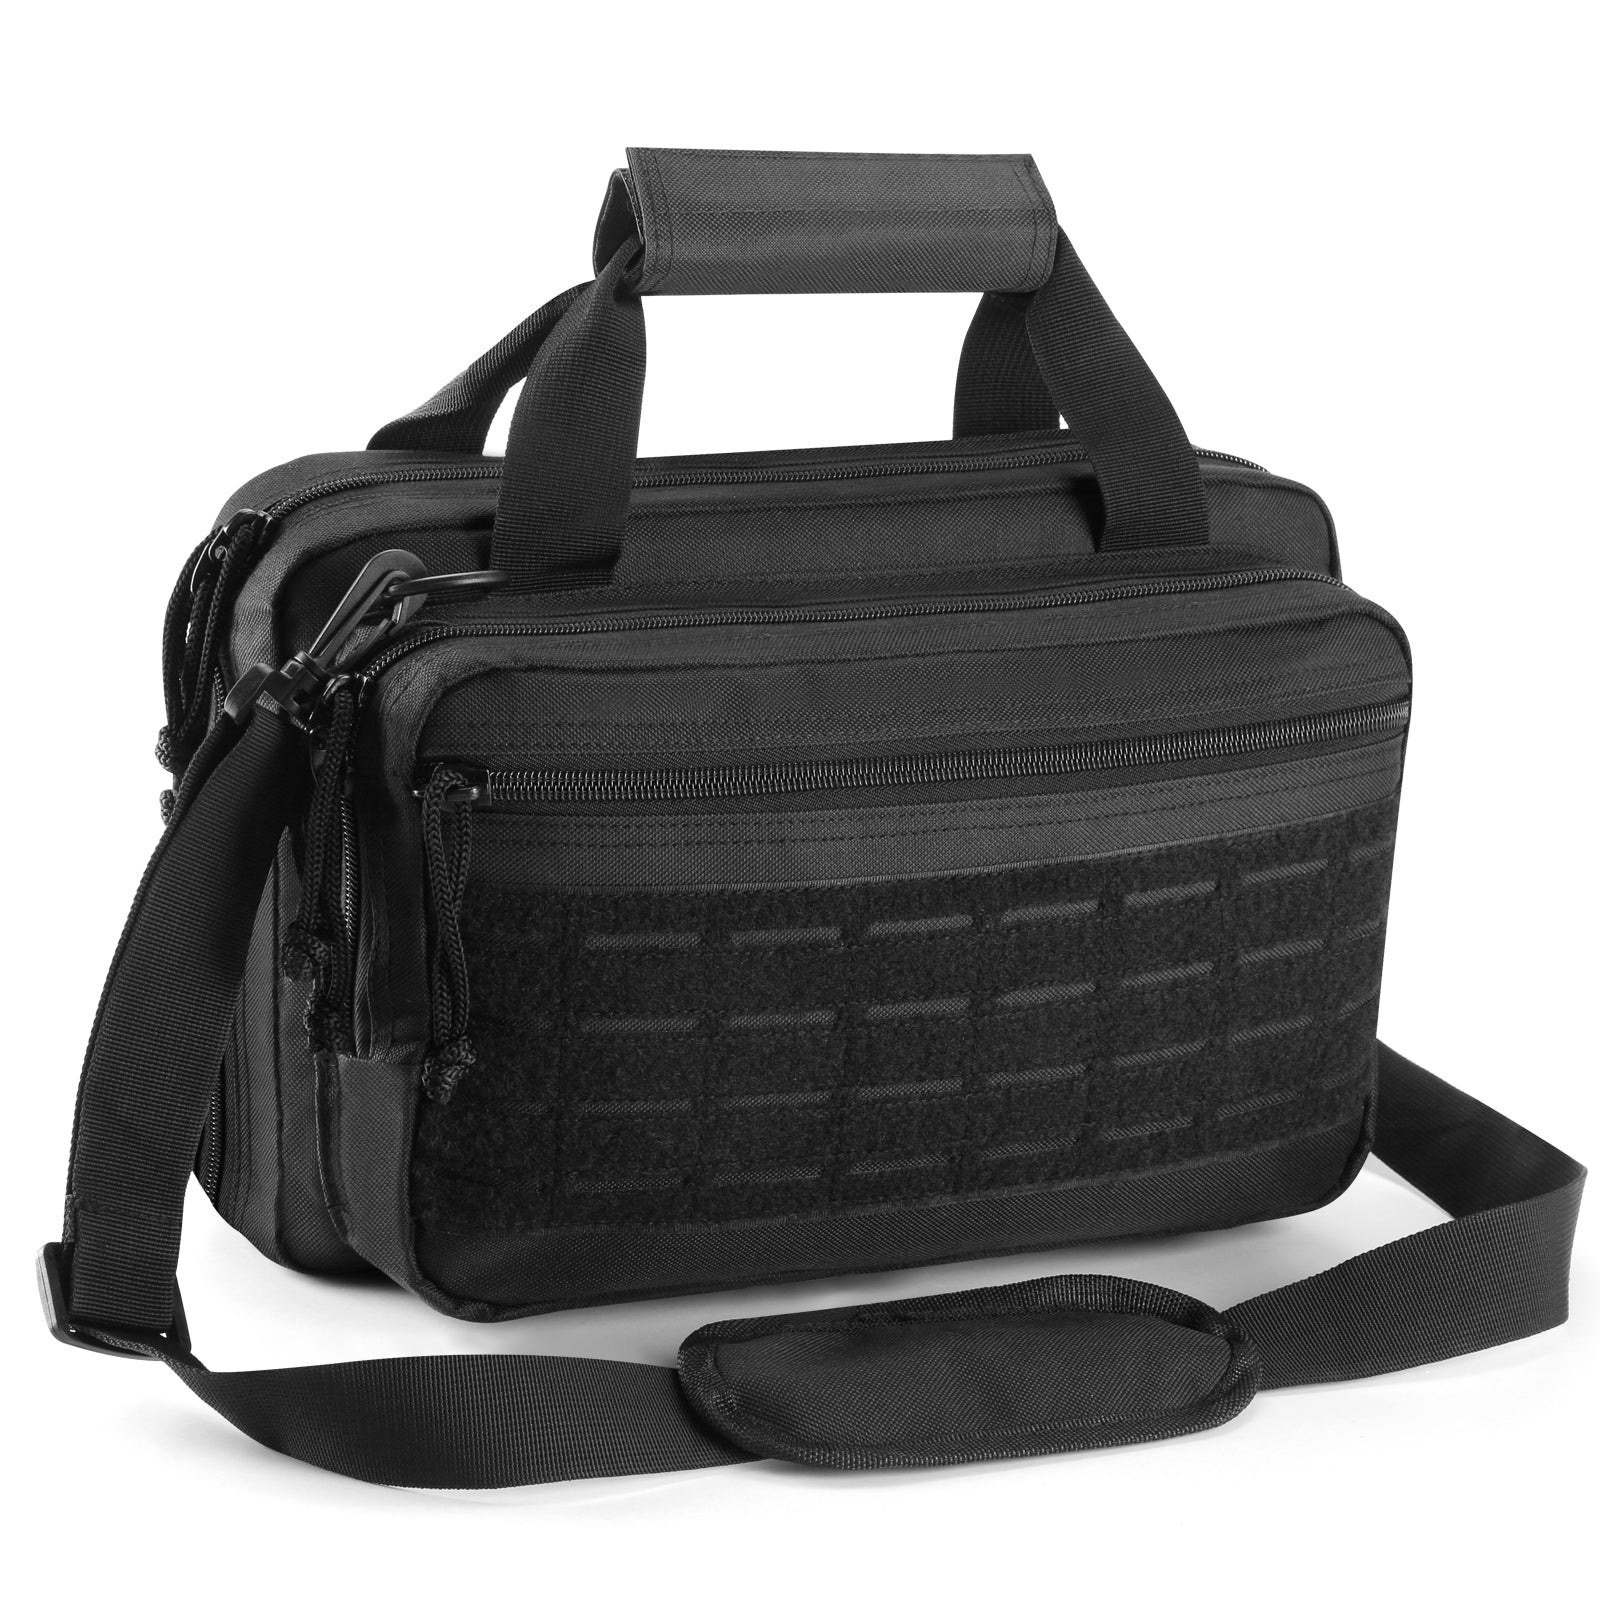 Tactical Firearm Range Bag For Pistol And Ammo, Shooting Luggage Range  Pistol Bag With Magazine Slots Multiple Compartments (black)